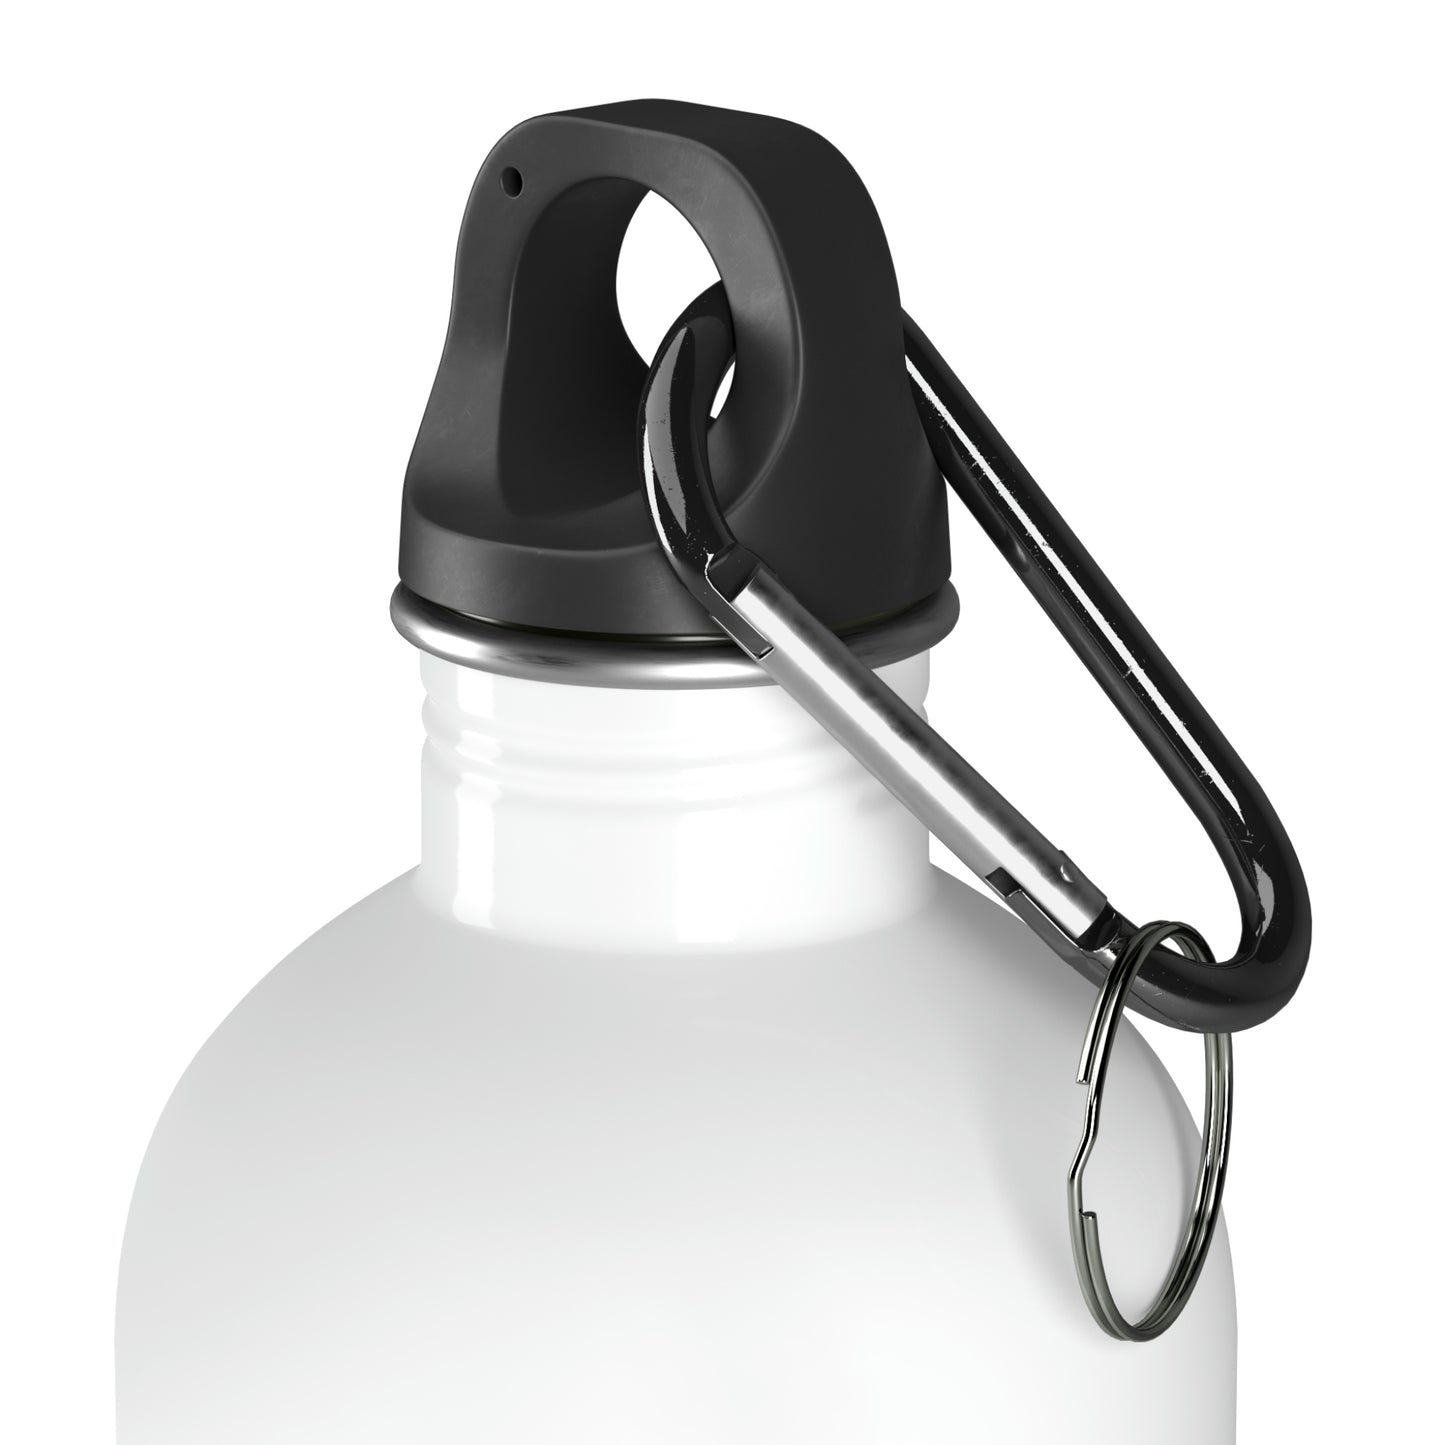 takes them on an adventure

A Twist of Magic: An Elderly Person's Unexpected Journey - The Alien Stainless Steel Water Bottle